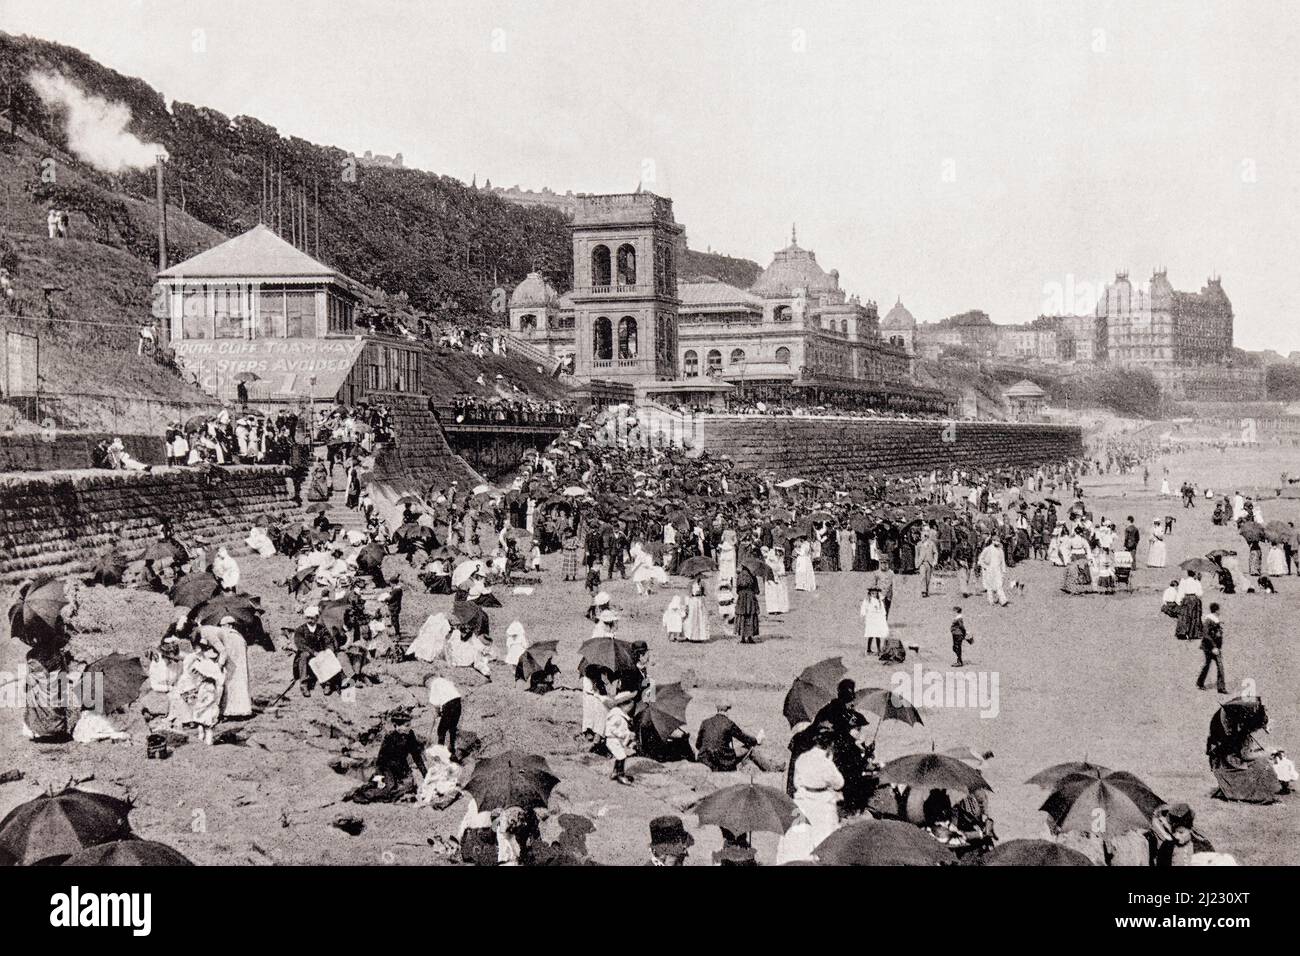 The Children's Corner, South Bay, Scarborough, North Yorkshire, England, seen here in the 19th century.  From Around The Coast,  An Album of Pictures from Photographs of the Chief Seaside Places of Interest in Great Britain and Ireland published London, 1895, by George Newnes Limited. Stock Photo